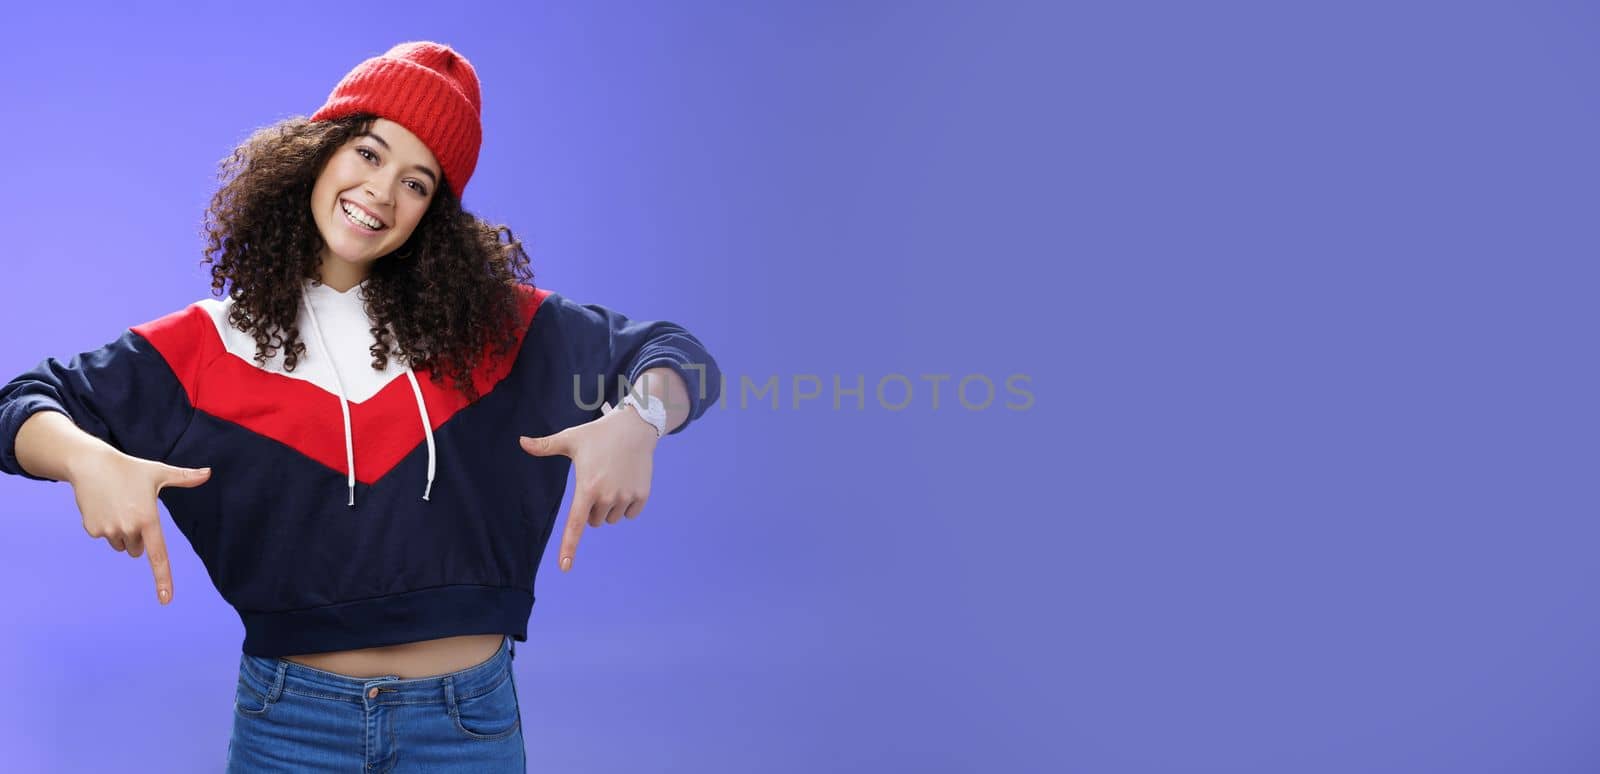 Waist-up shot of cool and stylish young woman with curly hair smiling flirty and joyful pointing down showing promotion as tilting head happily and posing over blue background in outdoor clothes by Benzoix